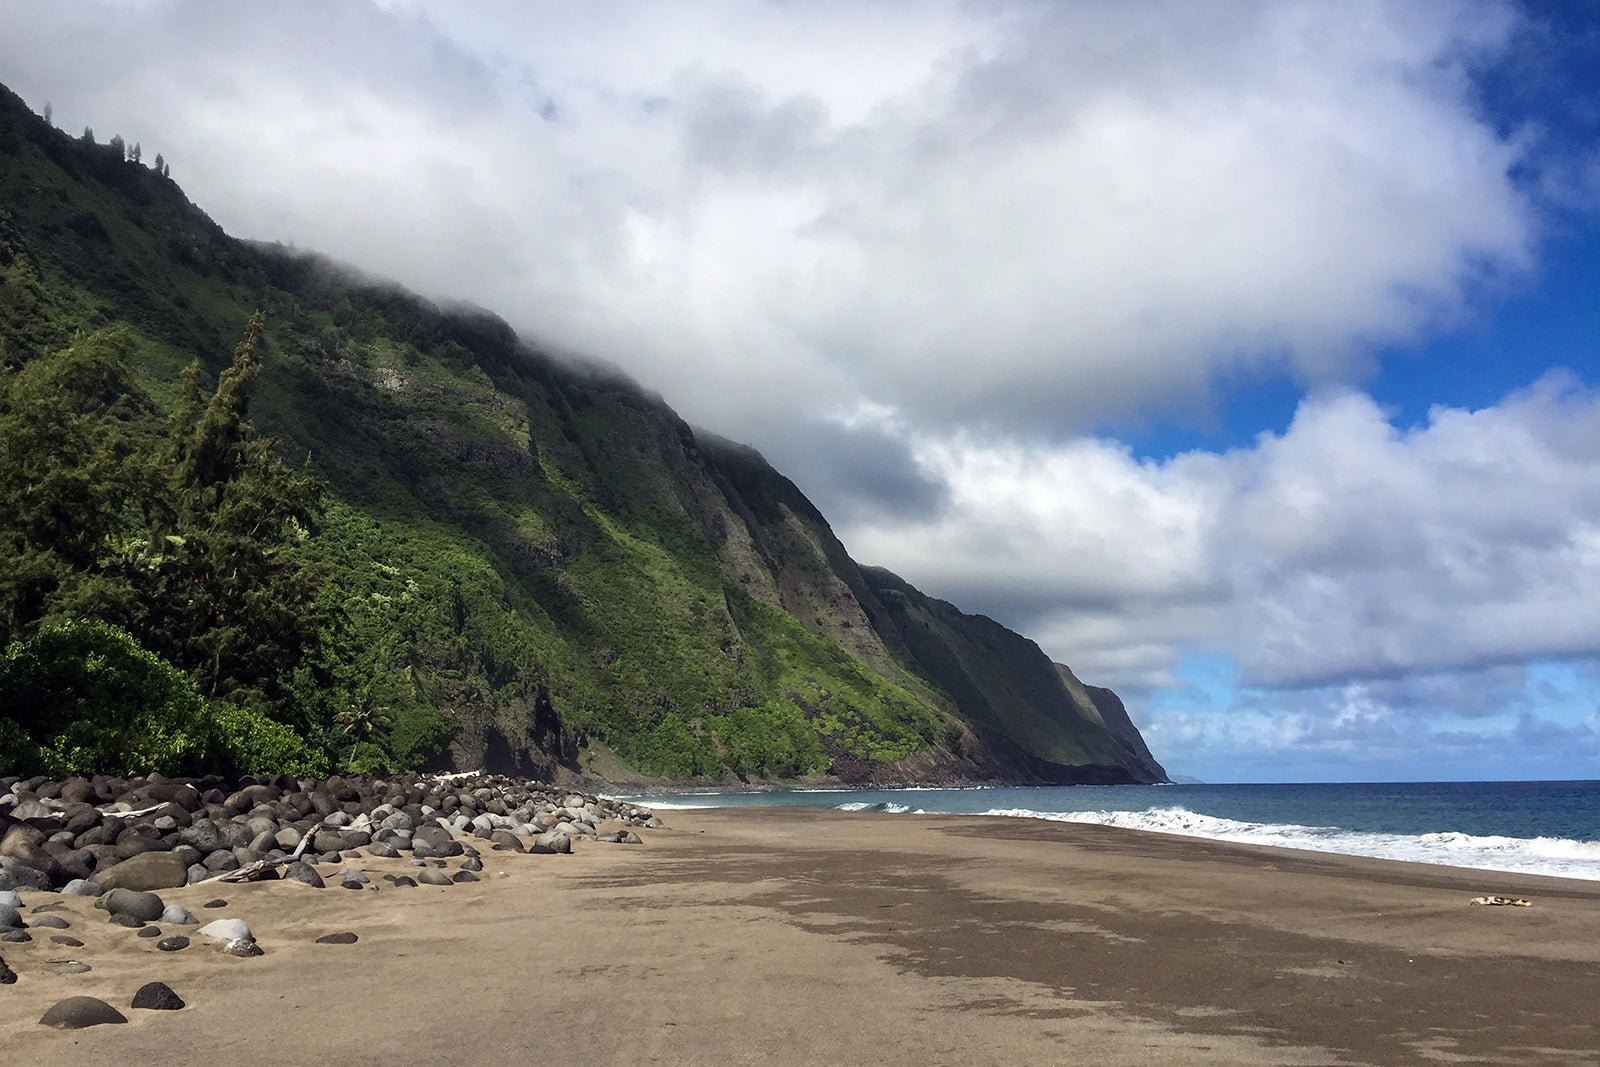 One of the most private beaches in the world at Kalaupapa National Historical Park in Molokai, Hawaii